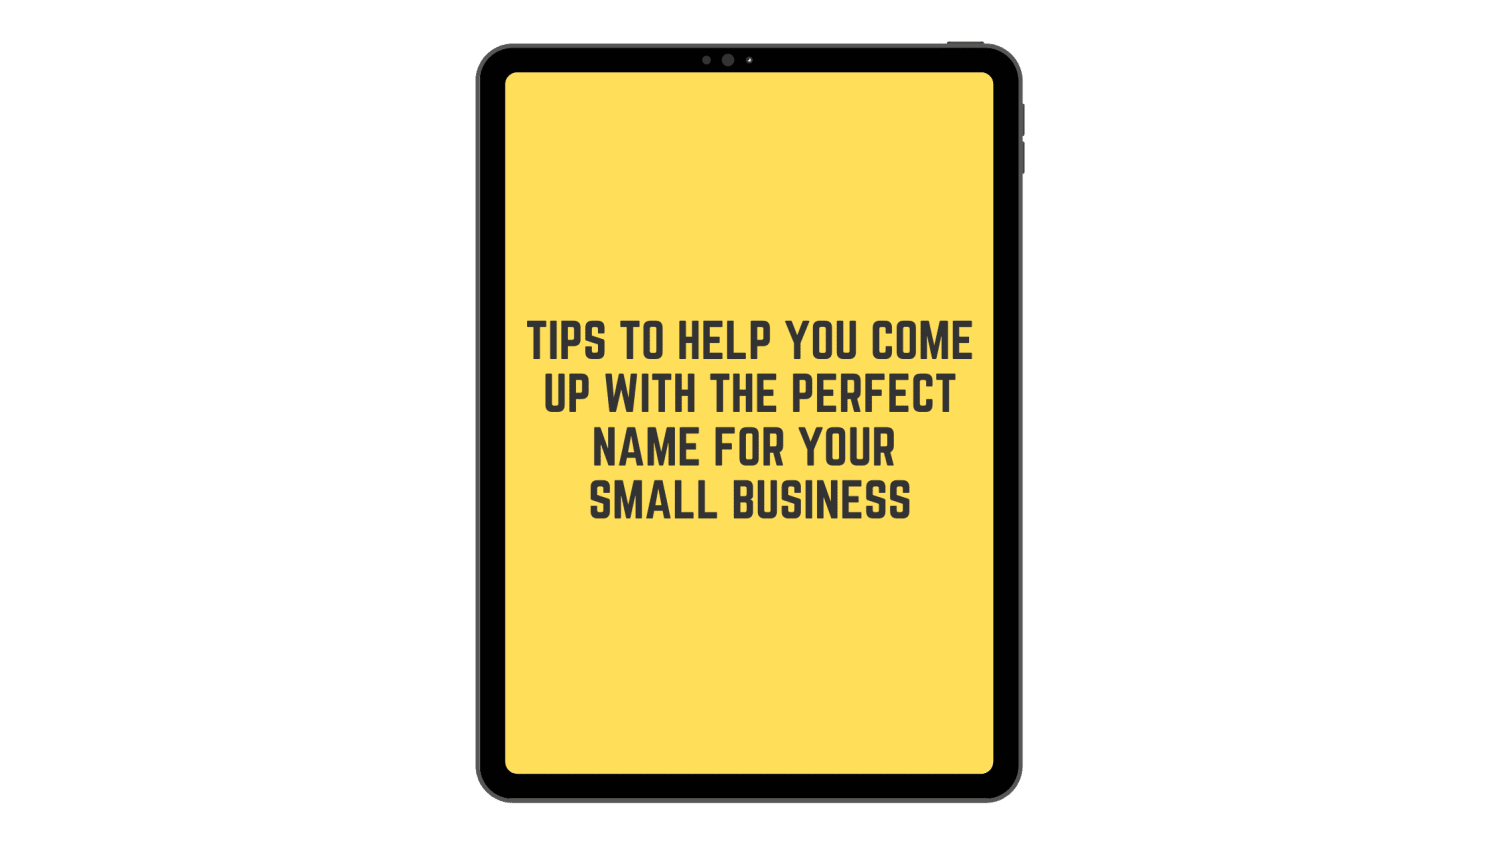 Tips to Help You Come Up with the Perfect Name for Your Small Business